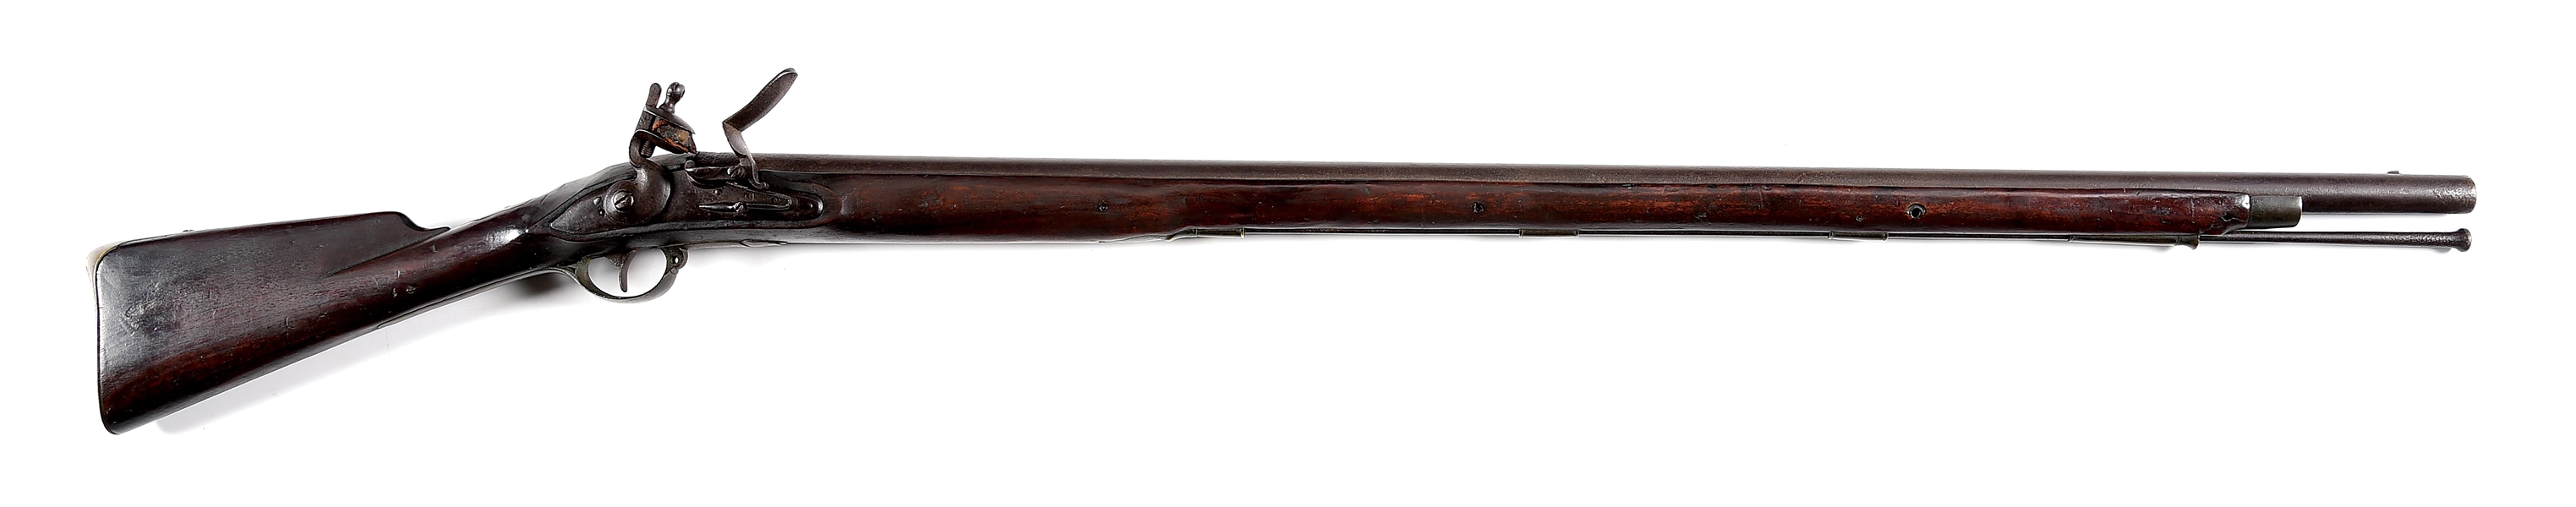 (A) MARYLAND COMMITTEE OF SAFETY STYLE MUSKET ATTRIBUTED TO PHILIP SHEETZ.